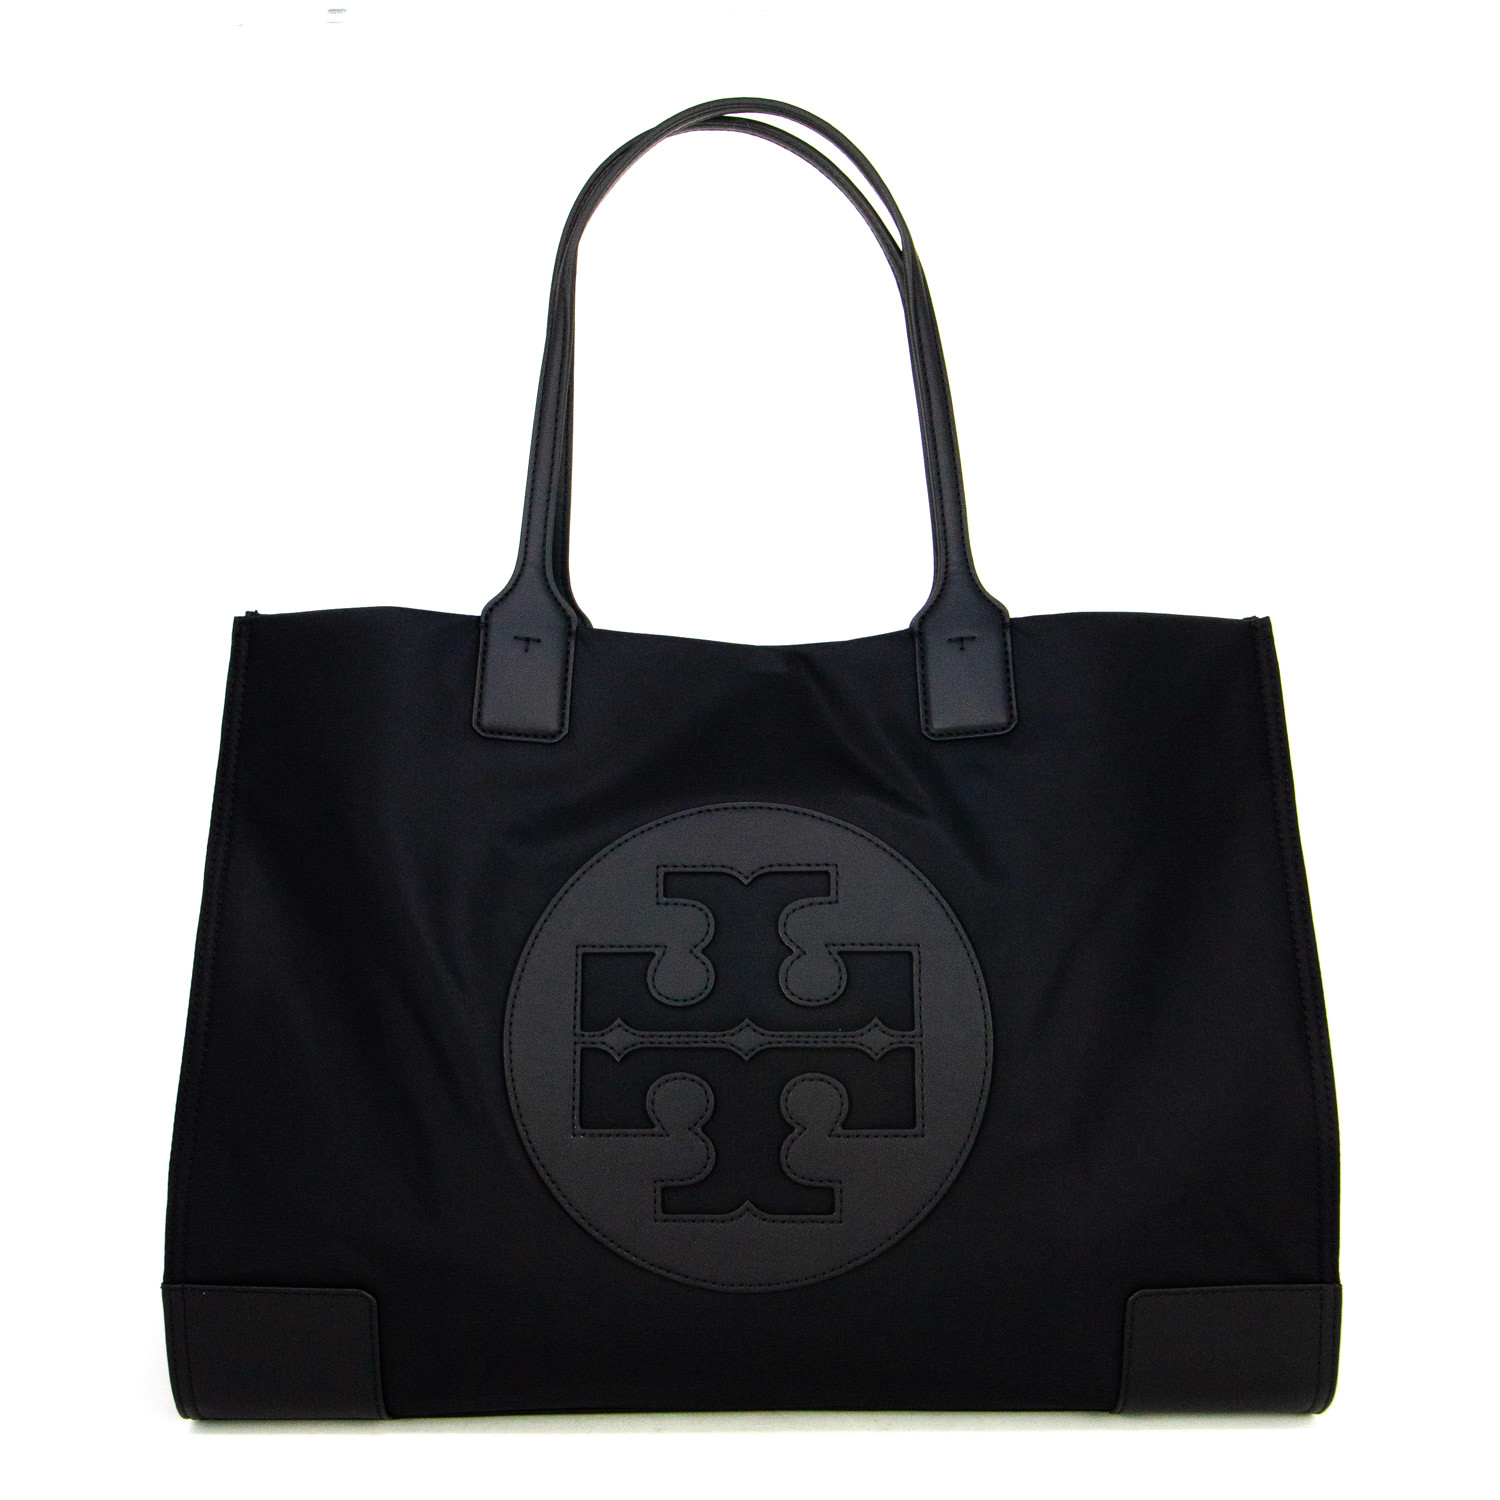 Ella Leather Tote // Black - Tory Burch - Touch of Modern